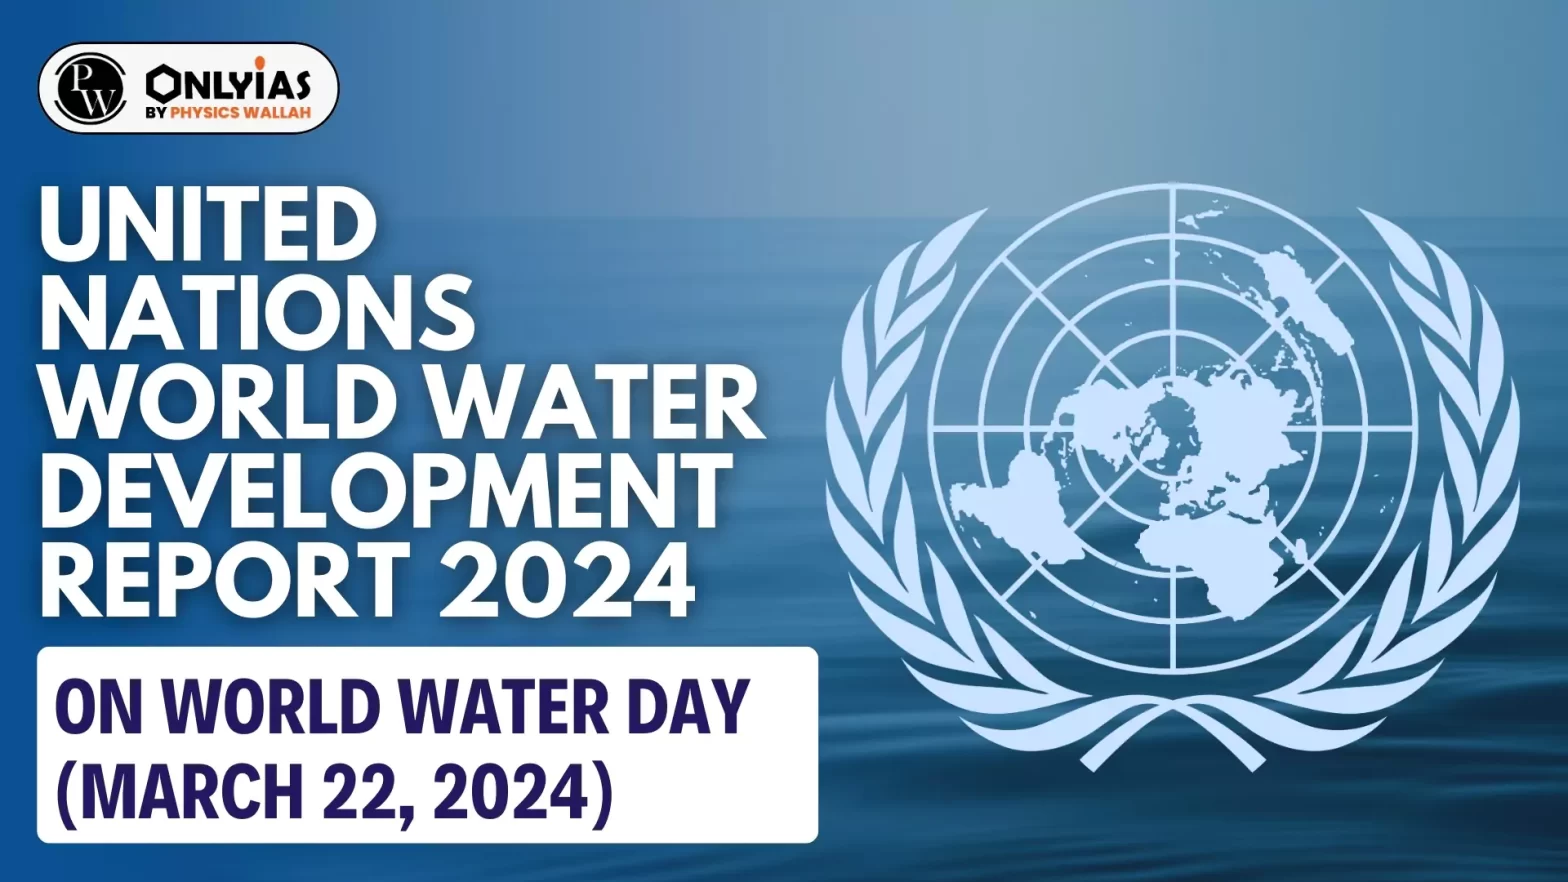 United Nations World Water Development Report 2024 on World Water Day (March 22, 2024)